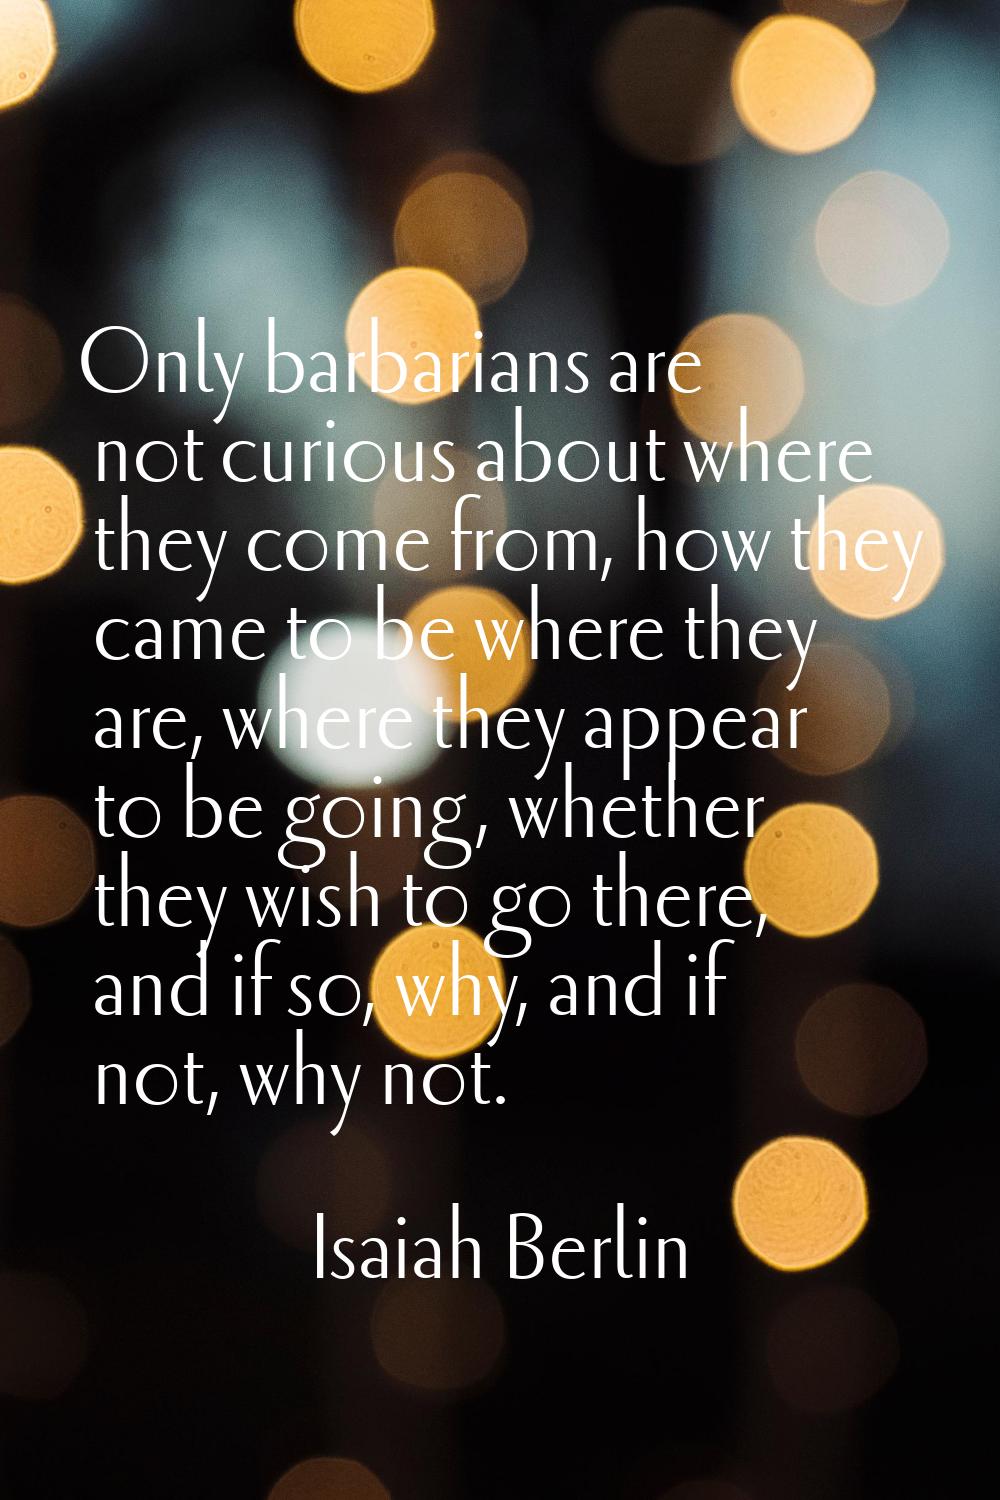 Only barbarians are not curious about where they come from, how they came to be where they are, whe